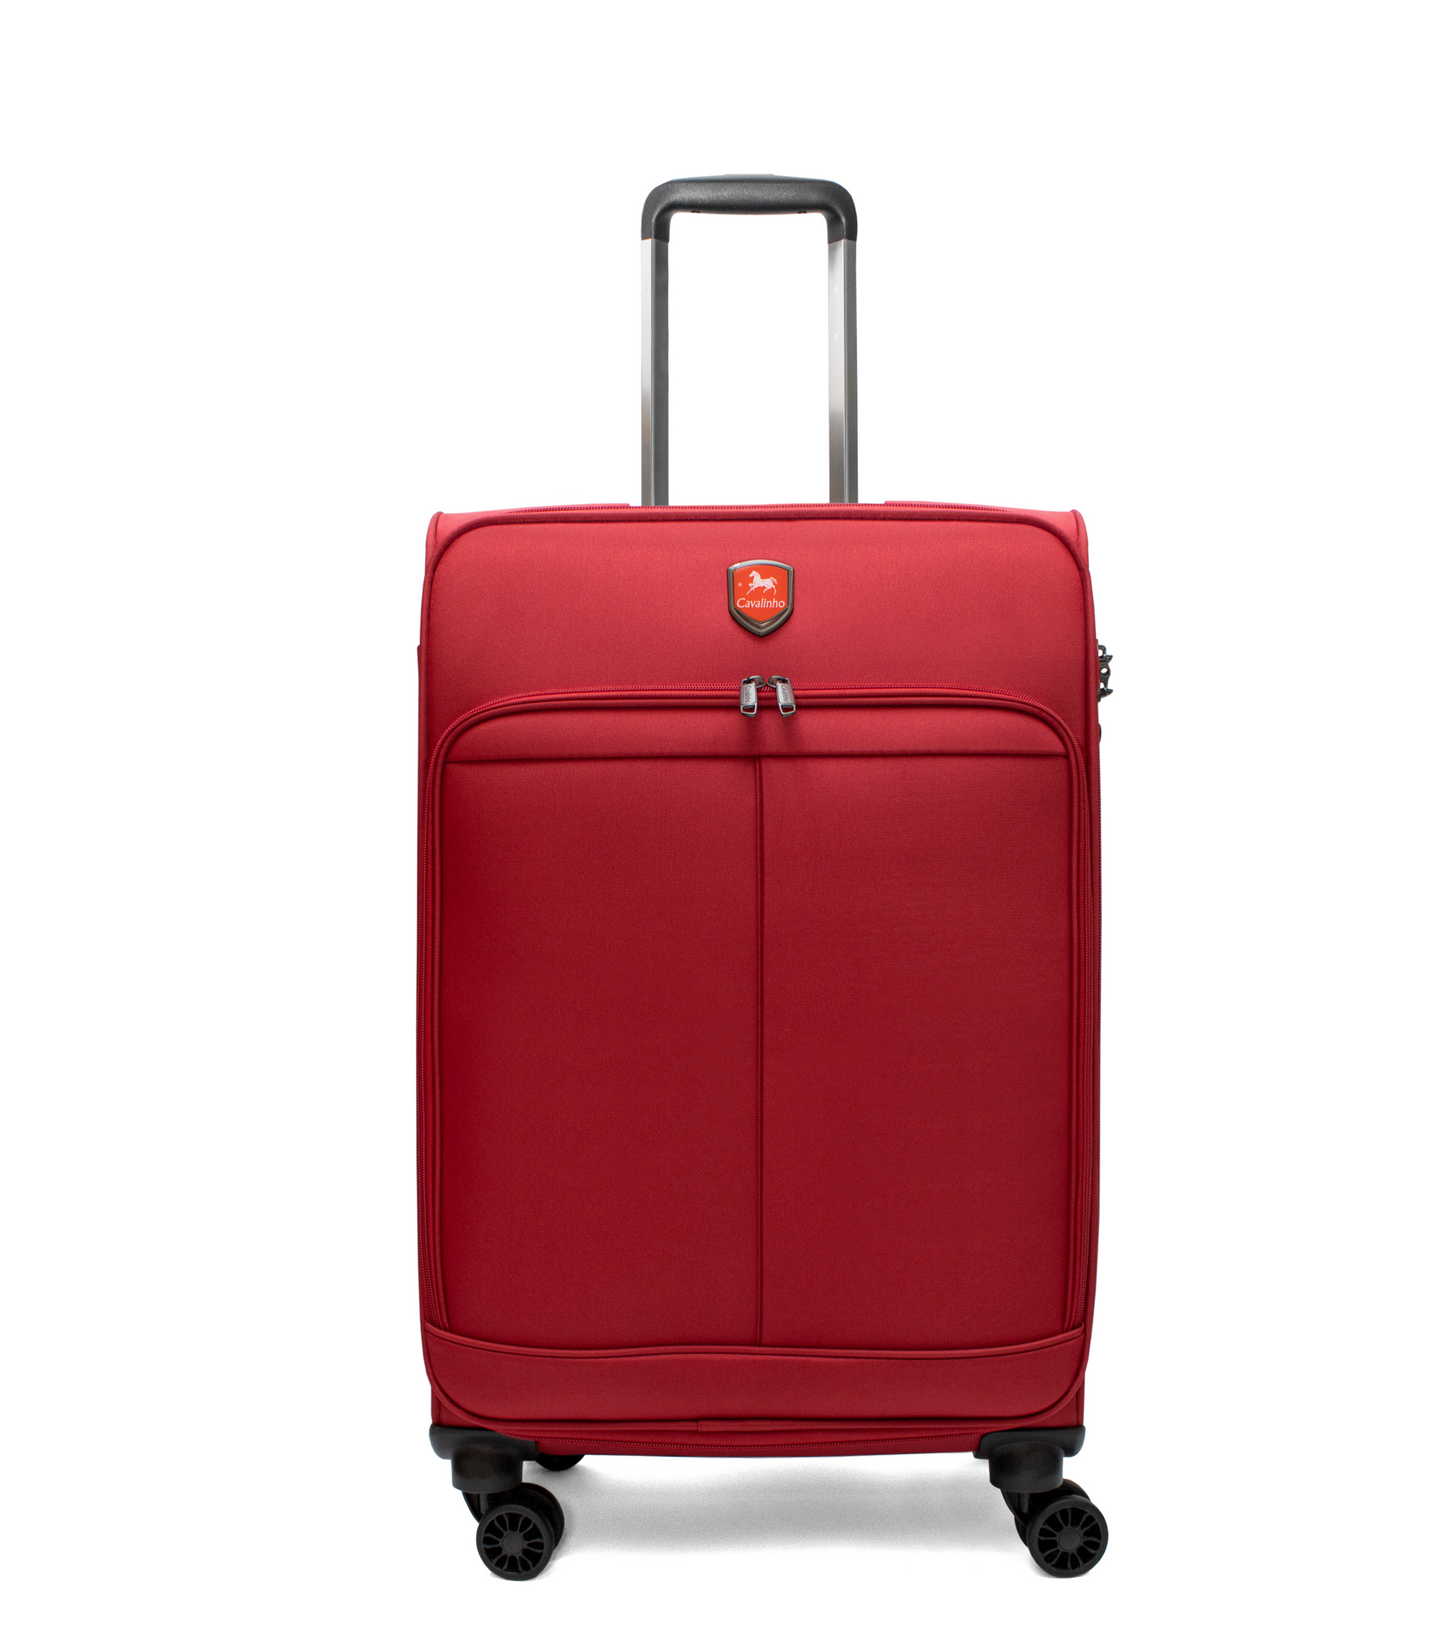 Cavalinho Check-in Softside Luggage (24" or 28") - 24 inch Red - 68020003.04.24_1